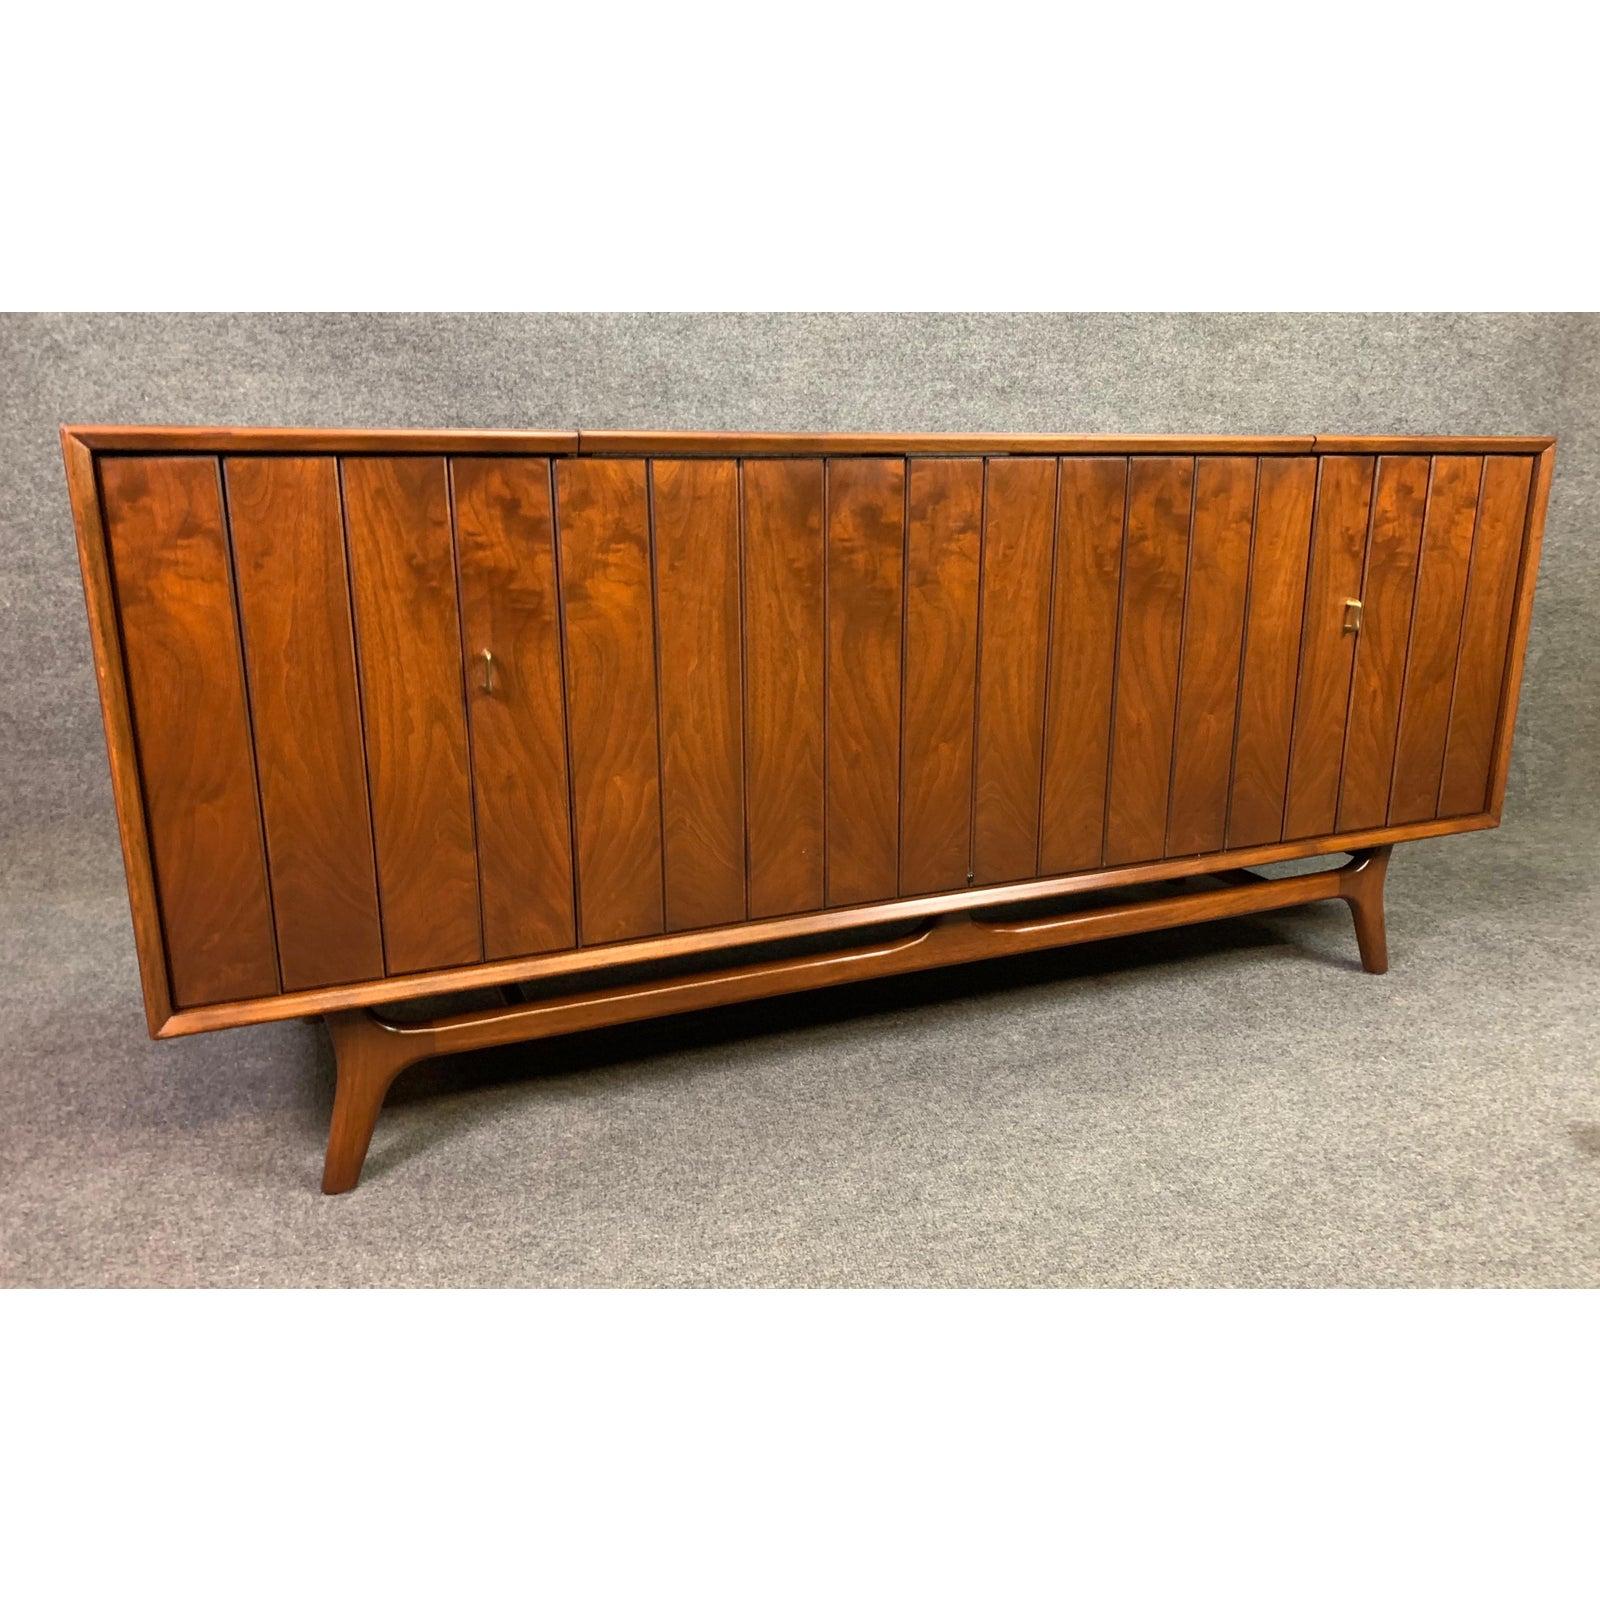 Mid-20th Century Vintage Mid-Century Modern Walnut Stereo Console Credenza by Zenith